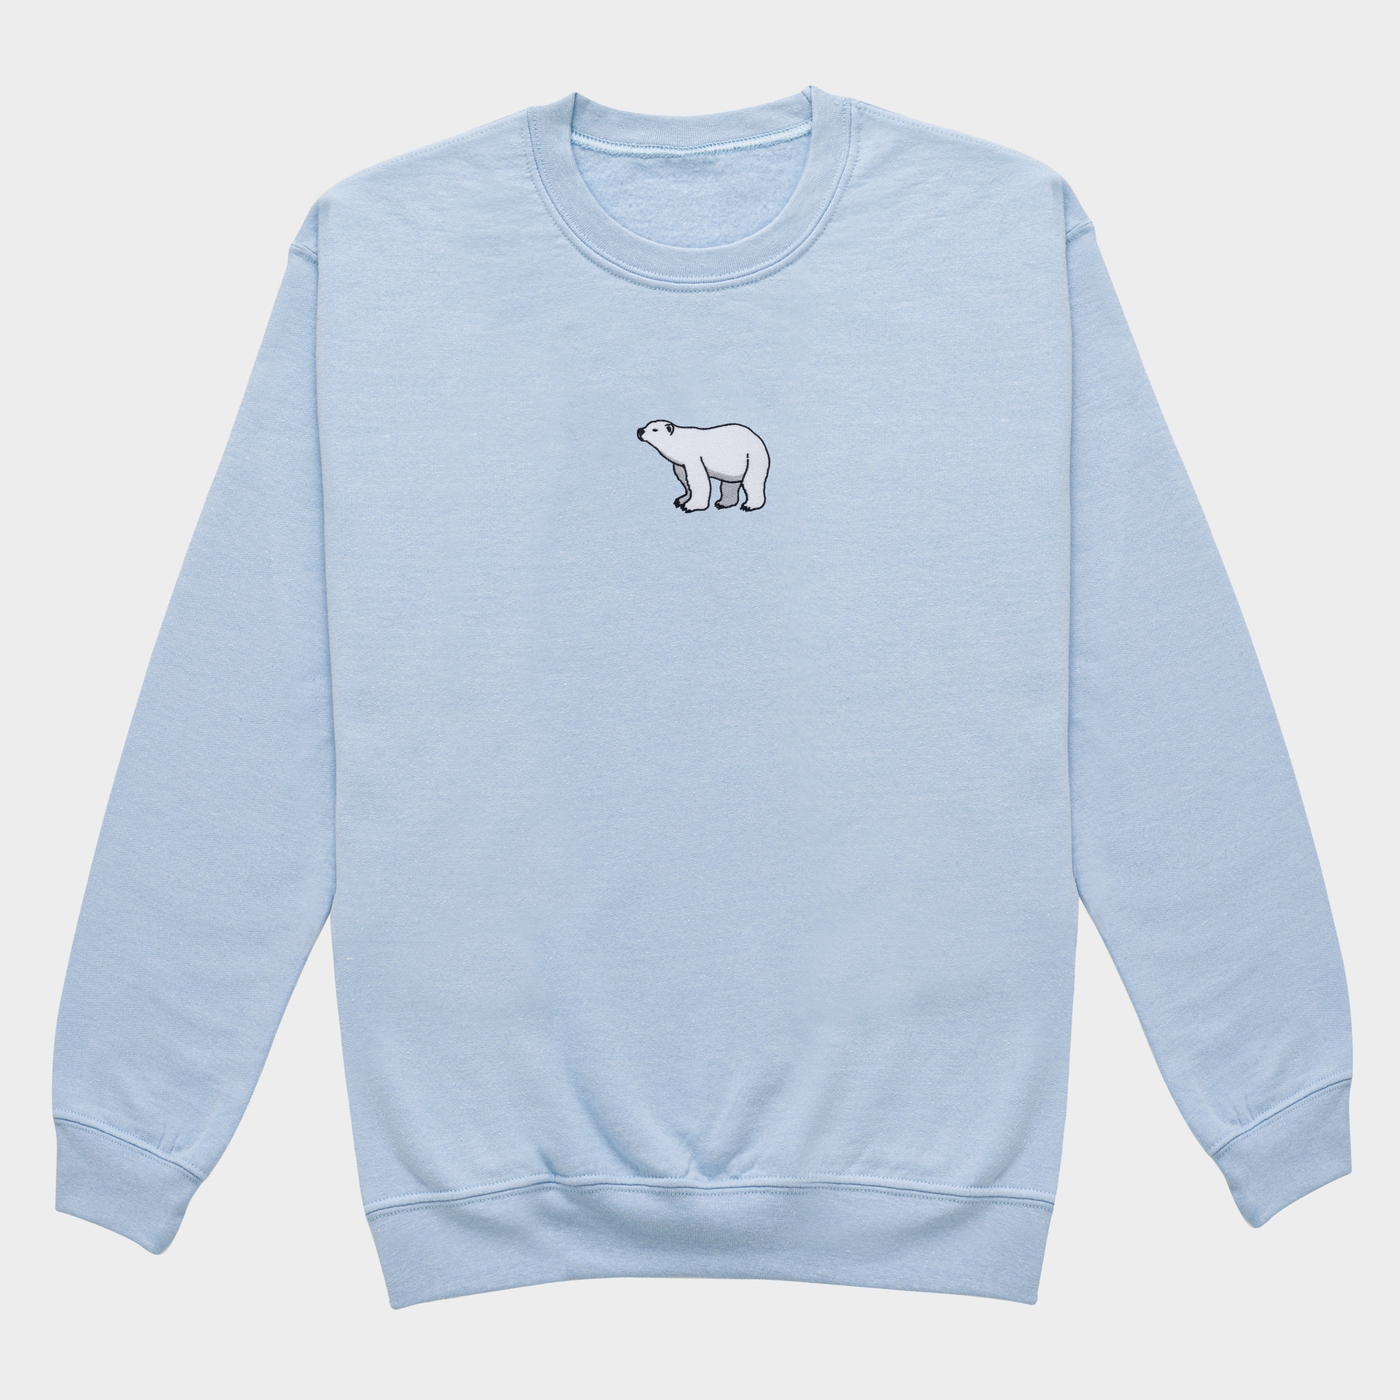 Bobby's Planet Women's Embroidered Polar Bear Sweatshirt from Arctic Polar Animals Collection in Light Blue Color#color_light-blue